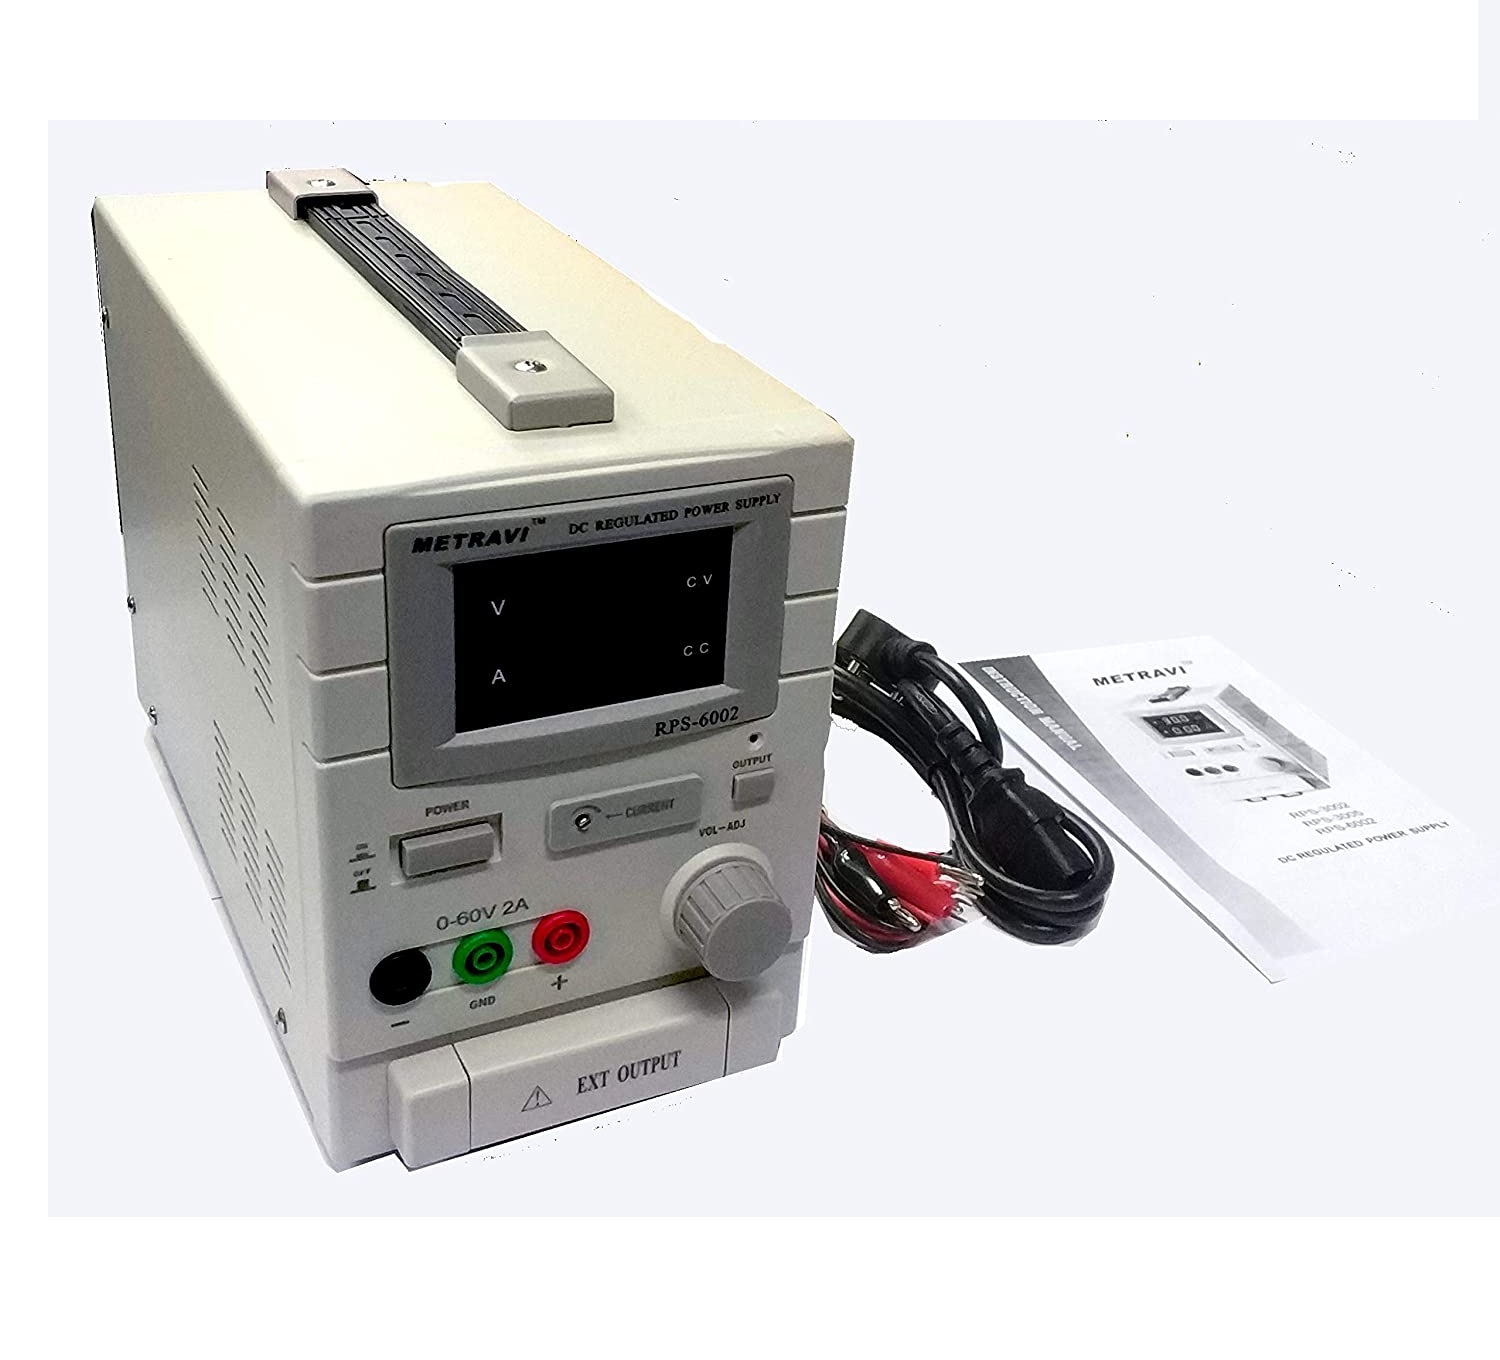 Metravi RPS-6002 DC Regulated Power Supply - Single Output with Backlit LCD Display of Variable 0-60V / 0-2A DC